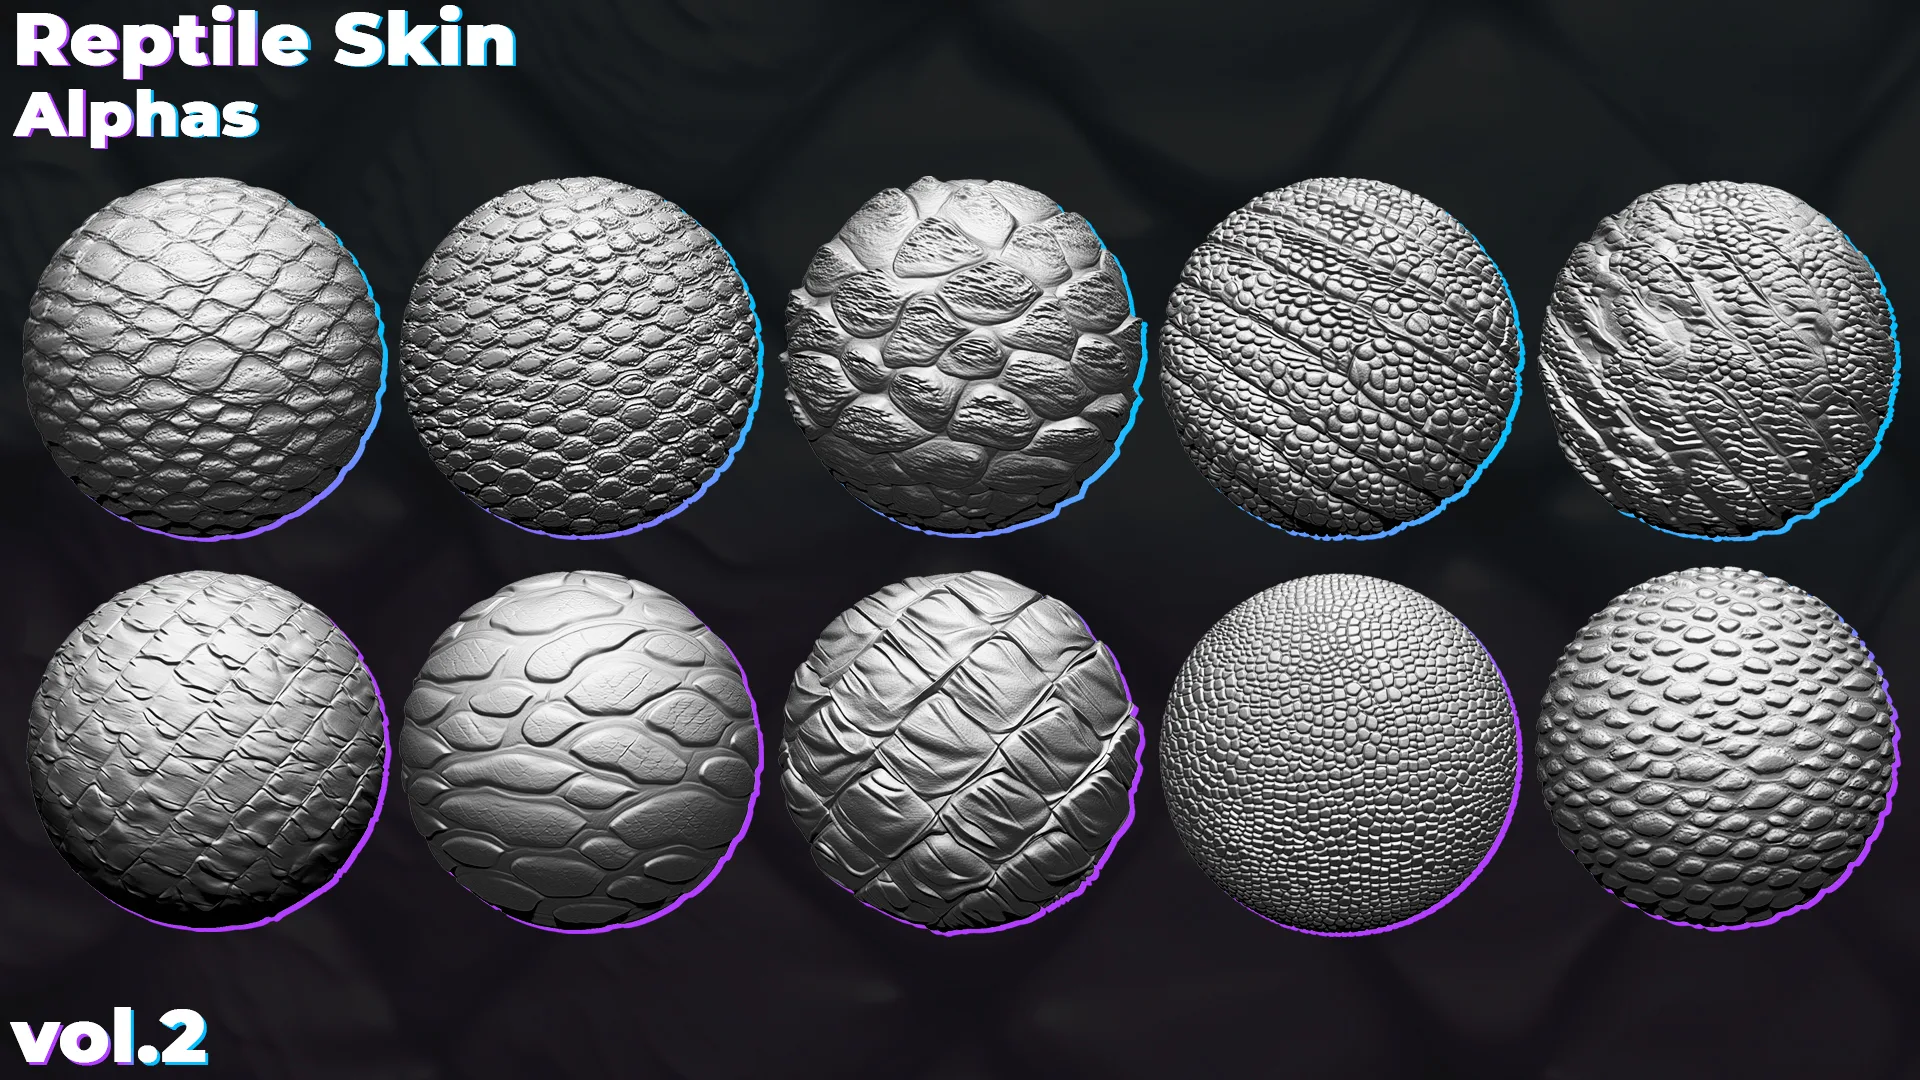 500+ Reptile, Dragon, Snake Skin Alphas for ZBrush (Displacement map) vol.2